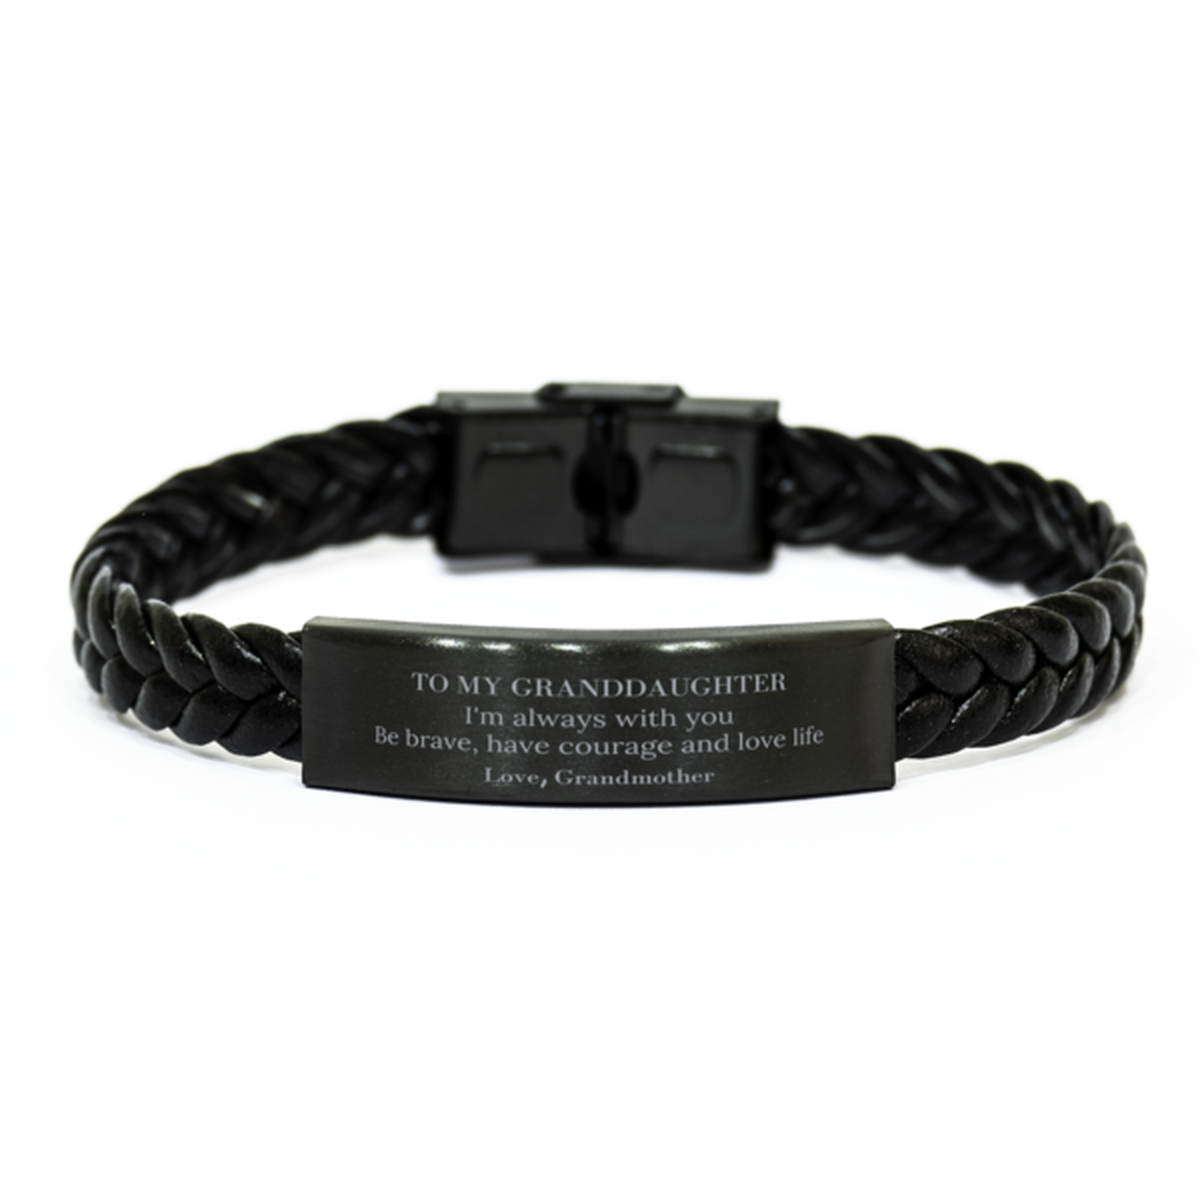 To My Granddaughter Gifts from Grandmother, Unique Braided Leather Bracelet Inspirational Christmas Birthday Graduation Gifts for Granddaughter I'm always with you. Be brave, have courage and love life. Love, Grandmother